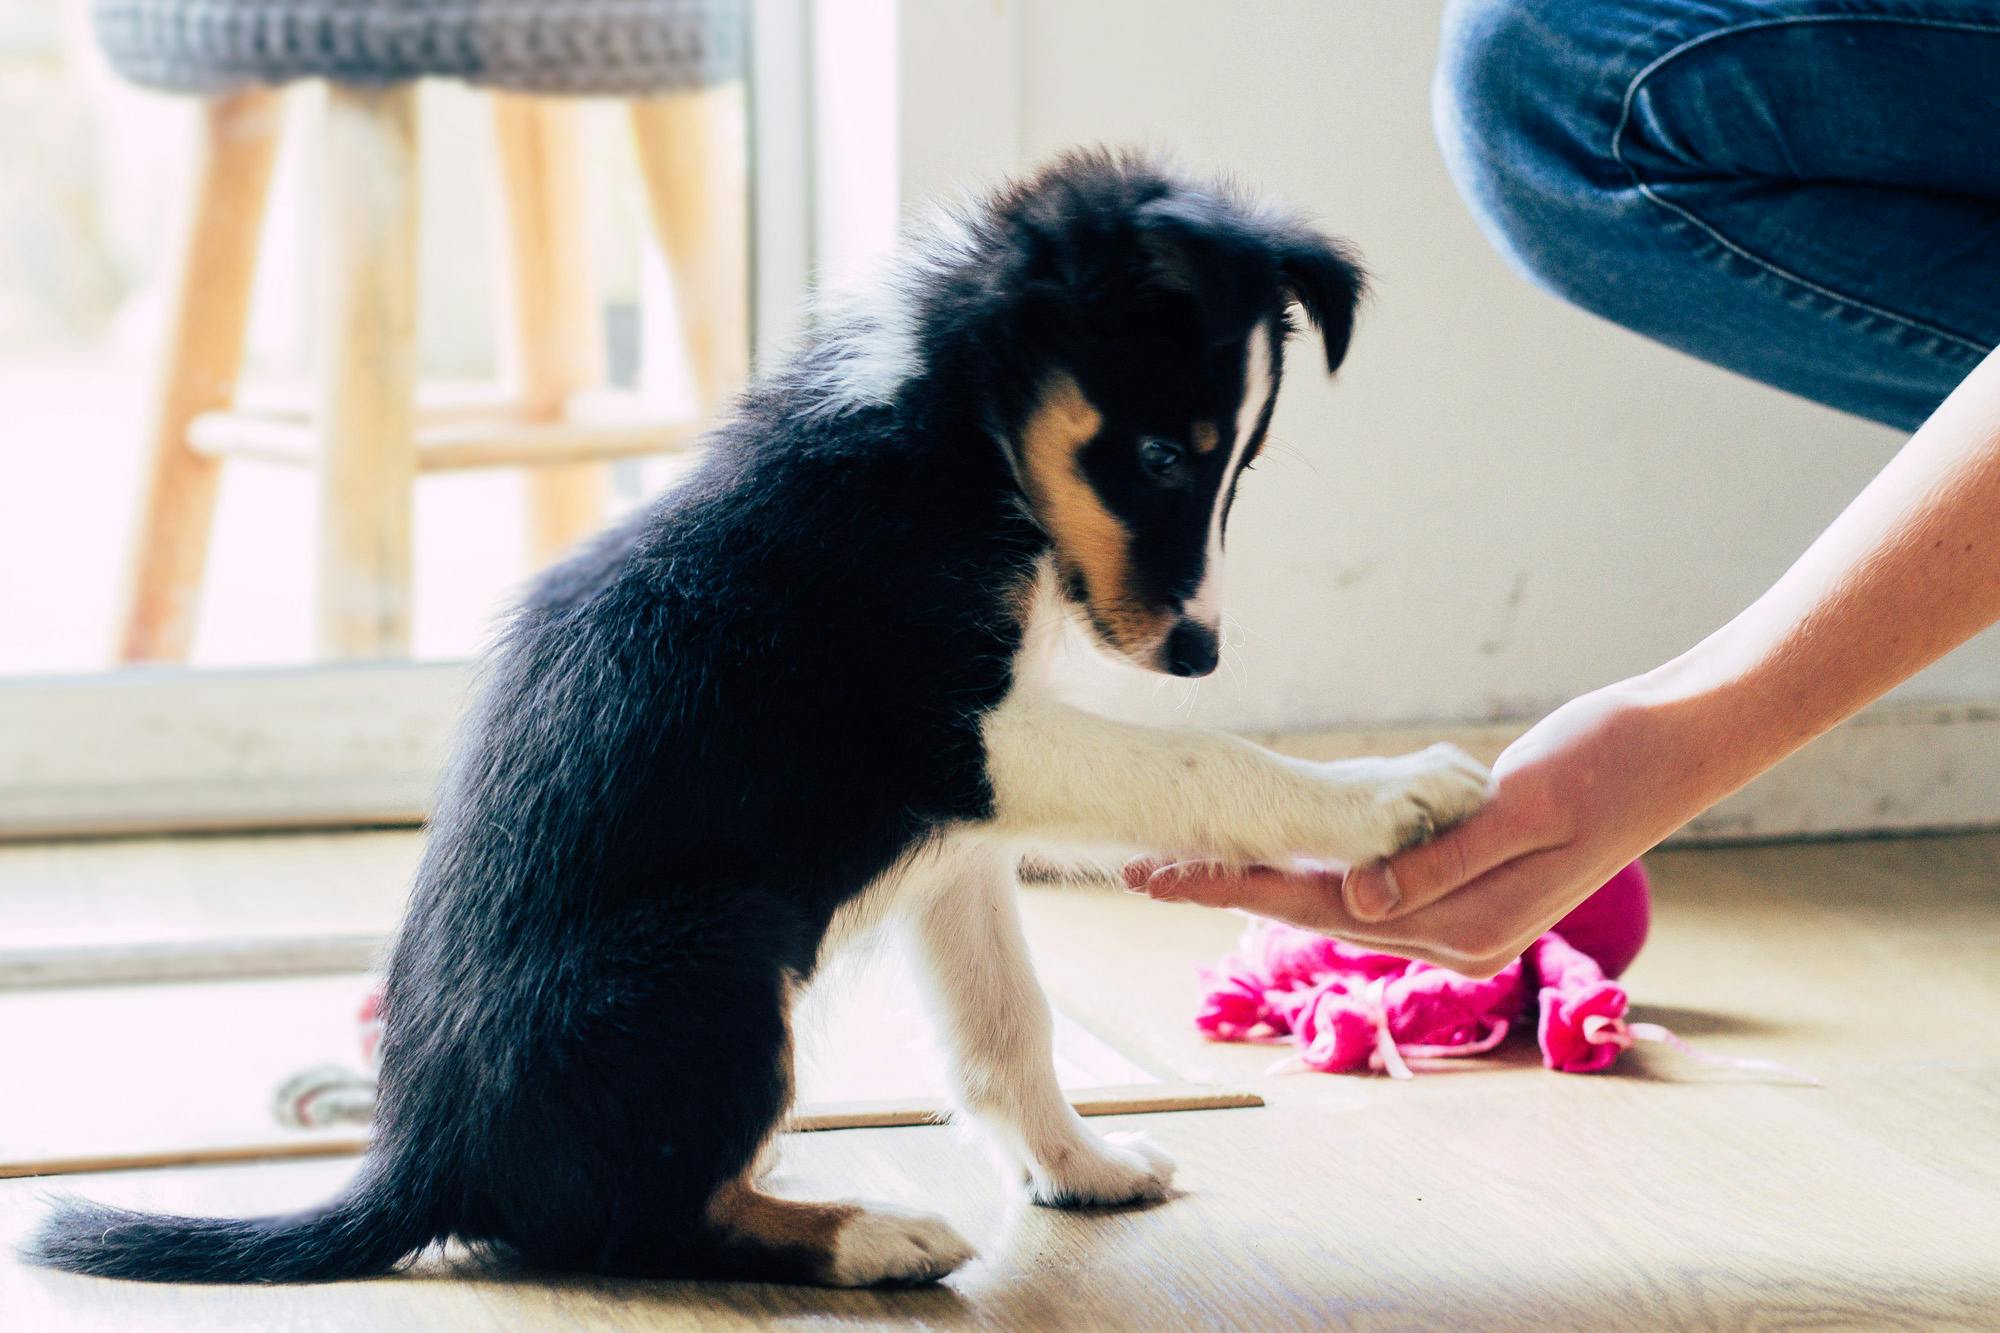 Young collie puppy places paw in hand, shake